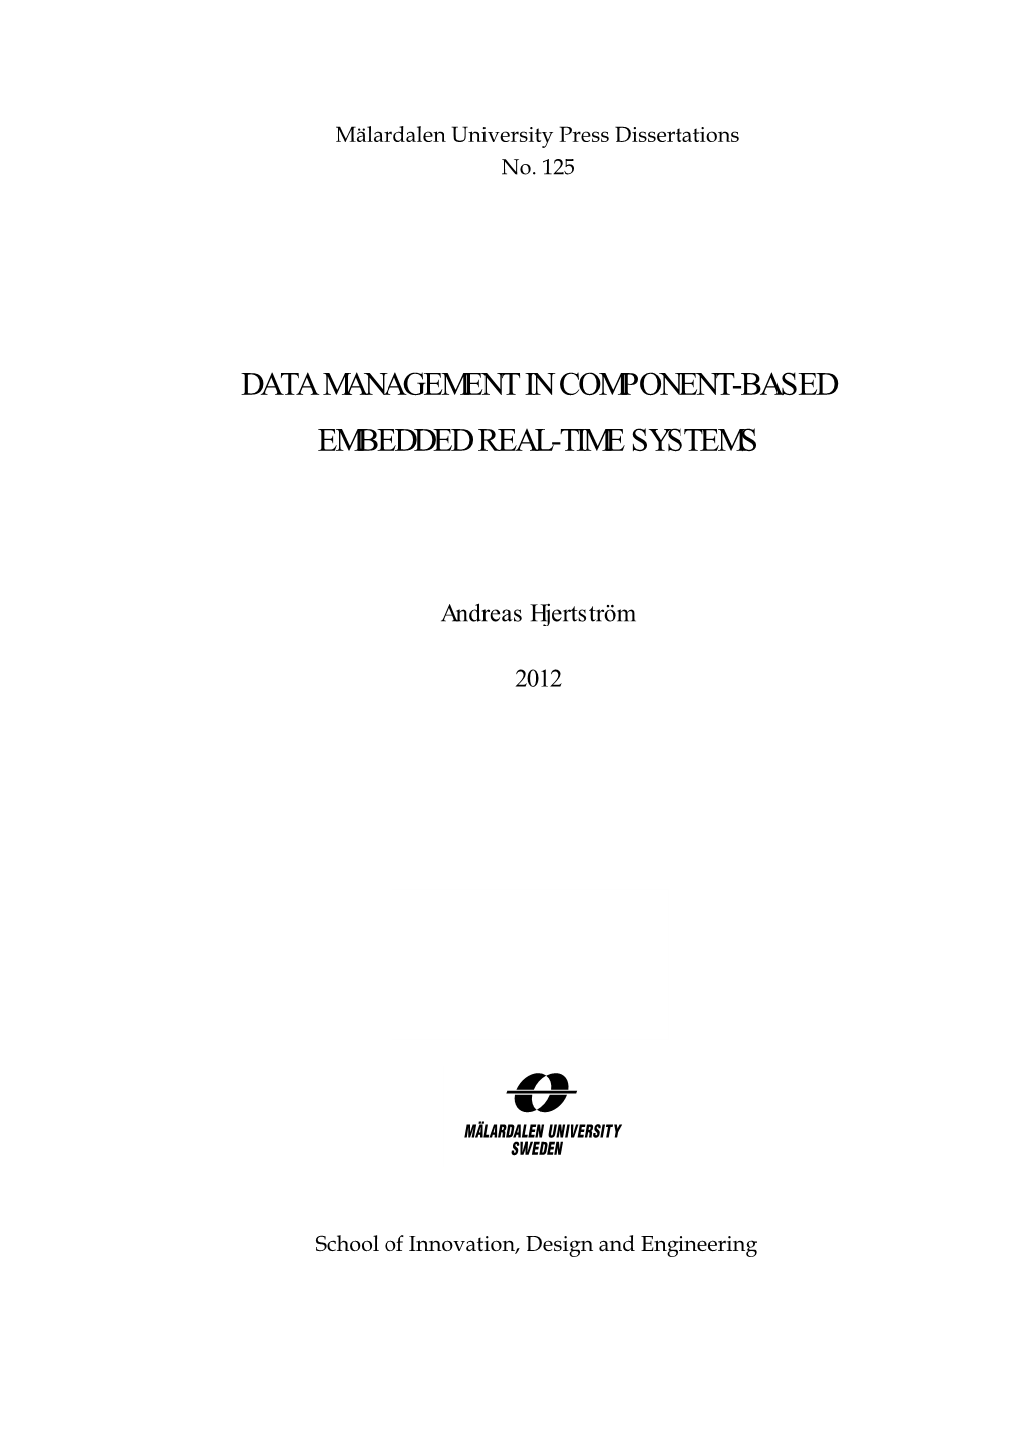 DATA MANAGEMENT in COMPONENT-BASED EMBEDDED REAL-TIME SYSTEMS Andreas Hjertström